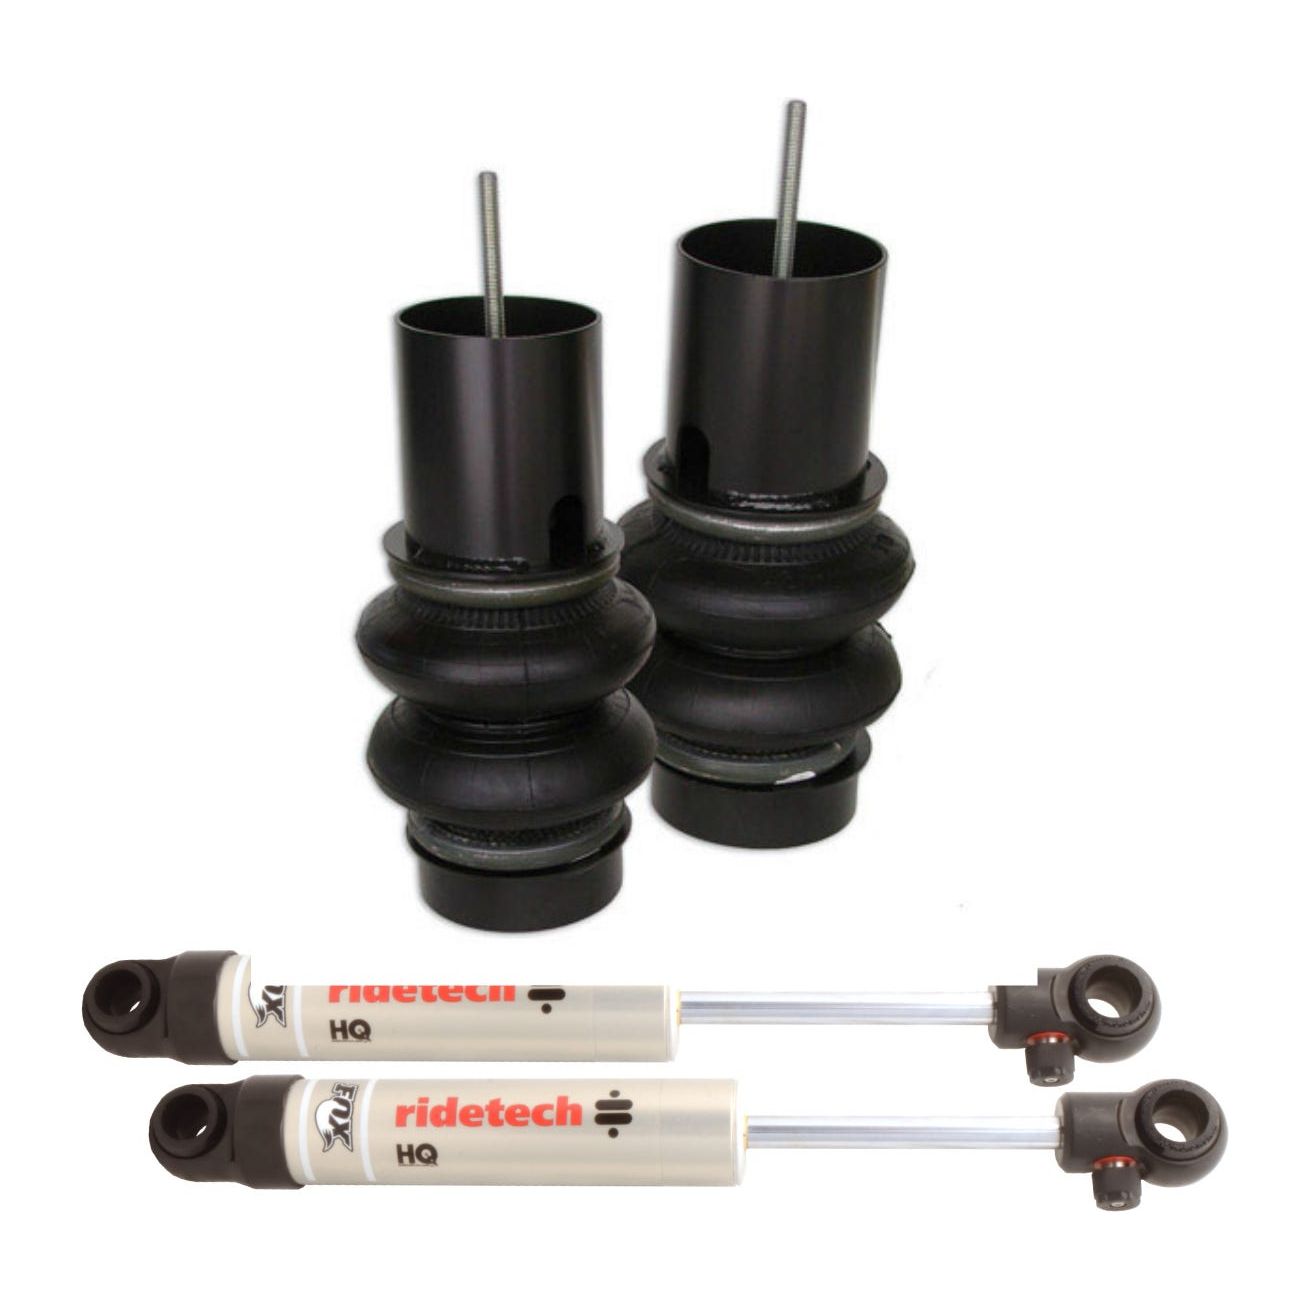 Front Coolride Air Springs & RideTech Shocks Fits 1991-96 Chevy Impala